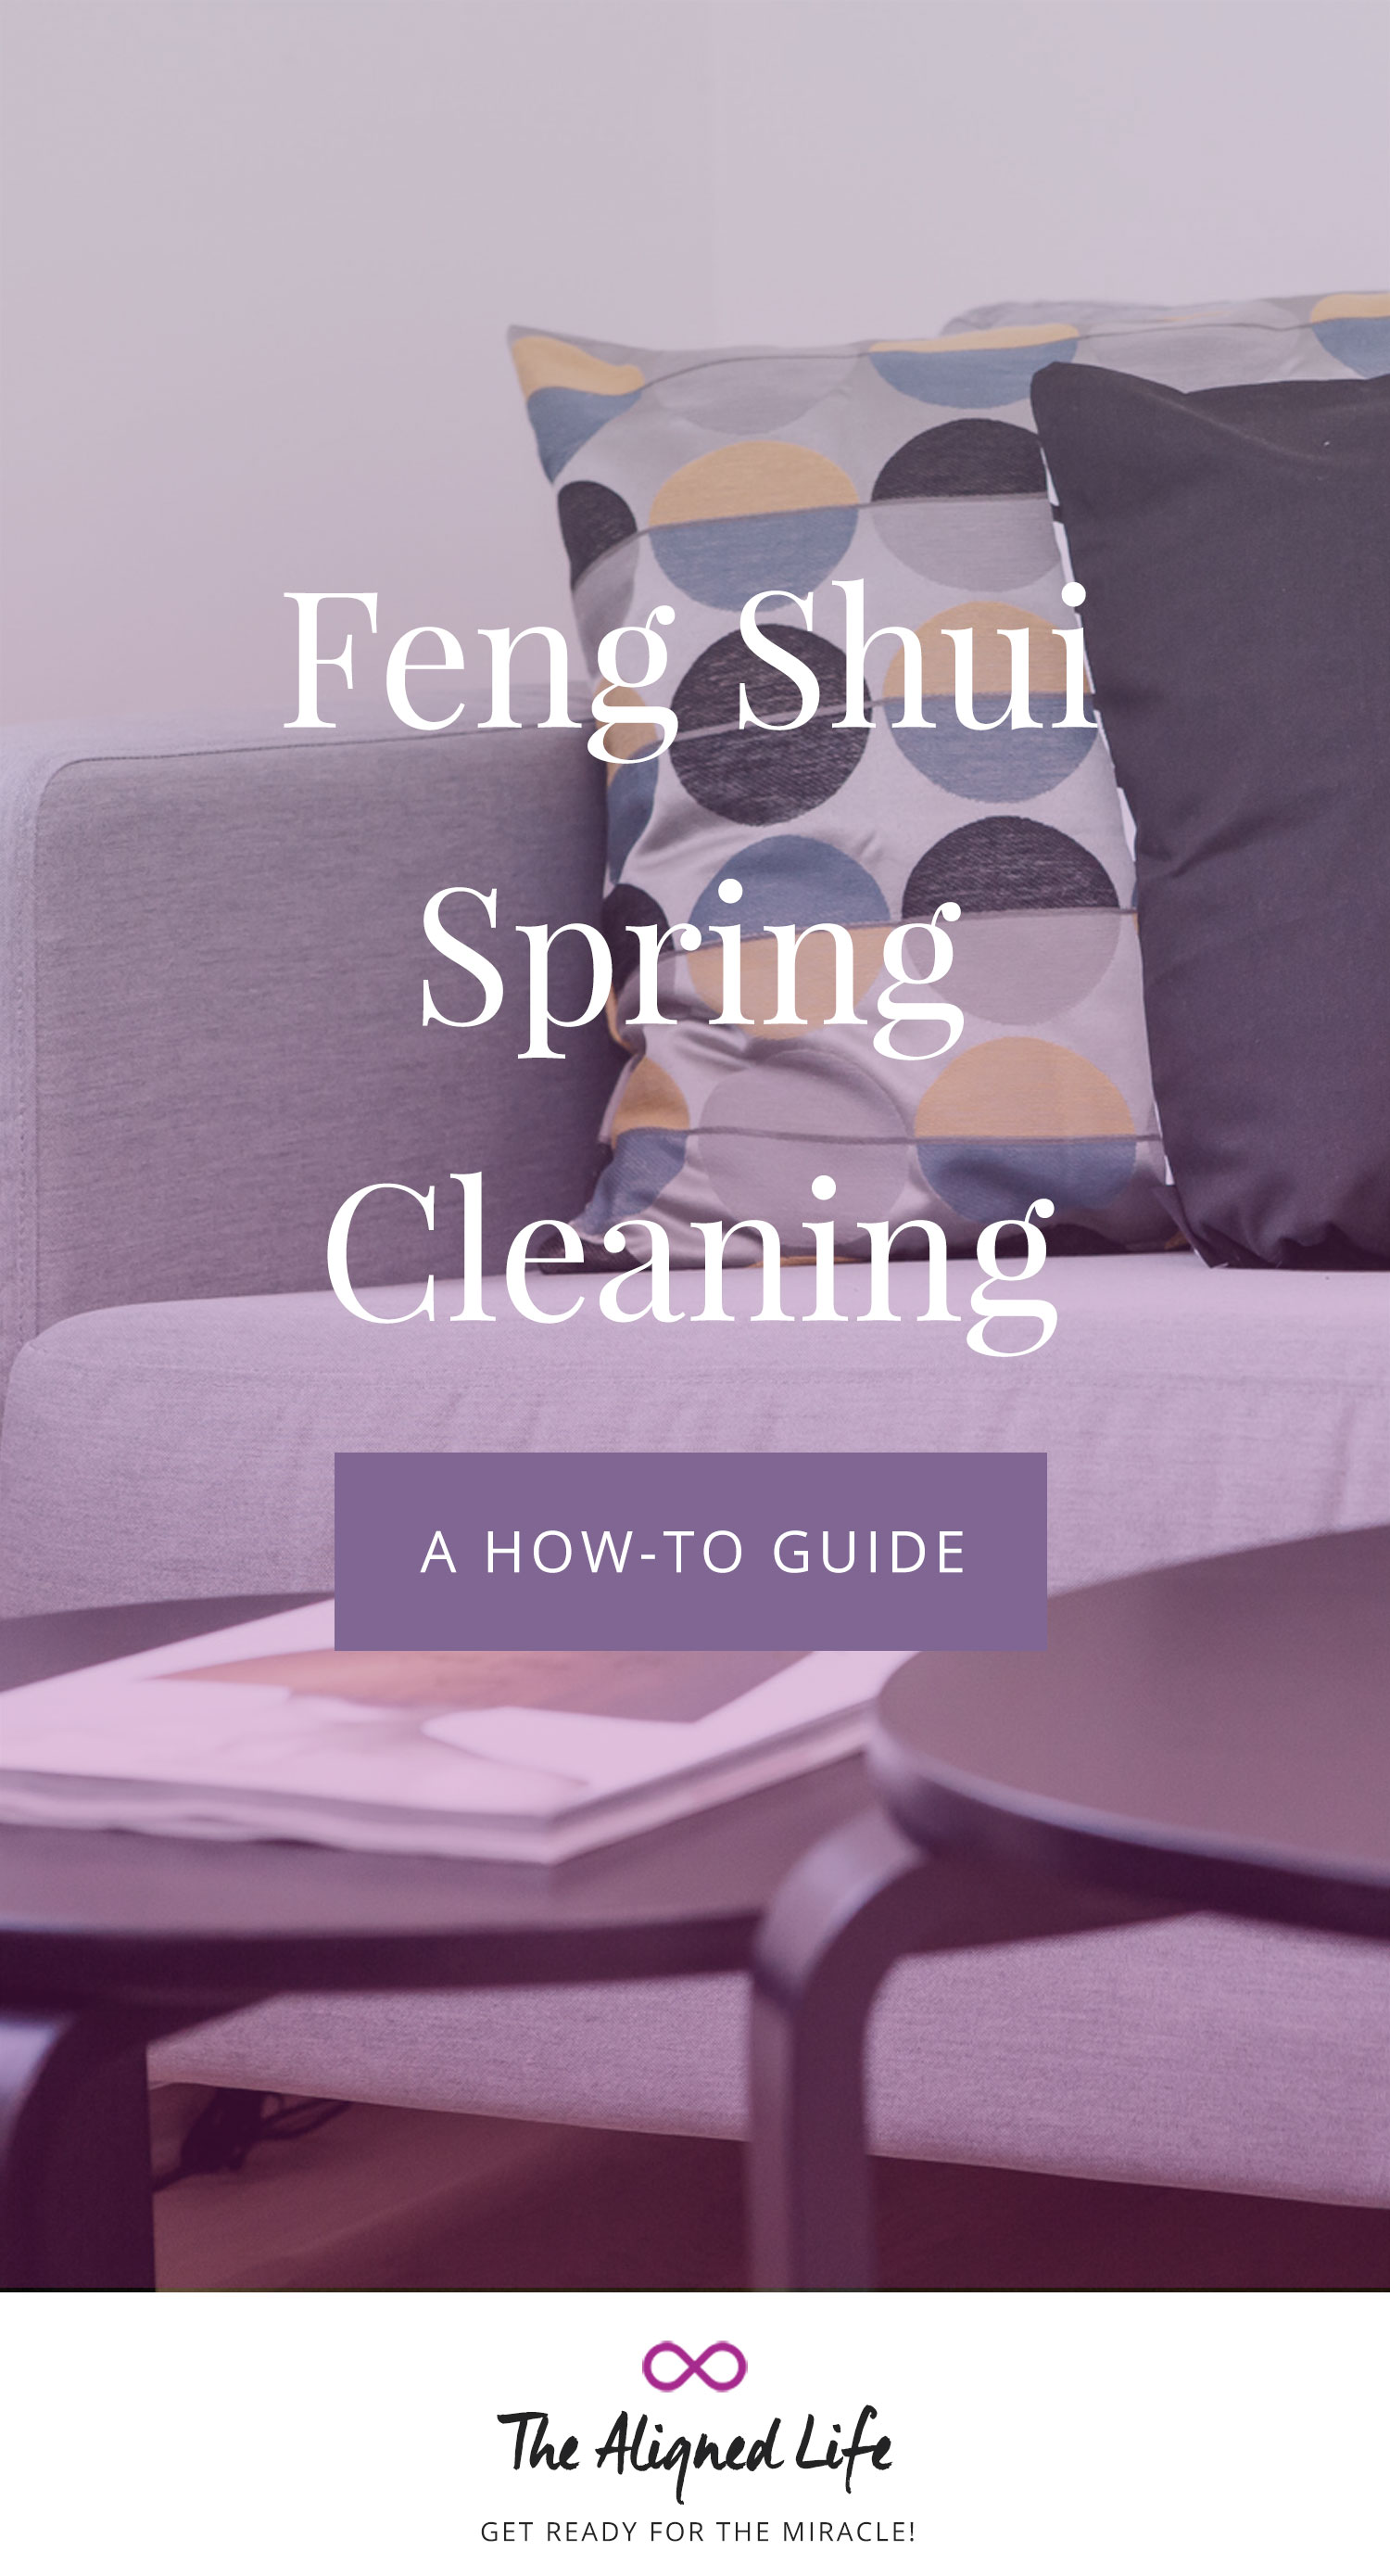 Feng Shui Spring Cleaning